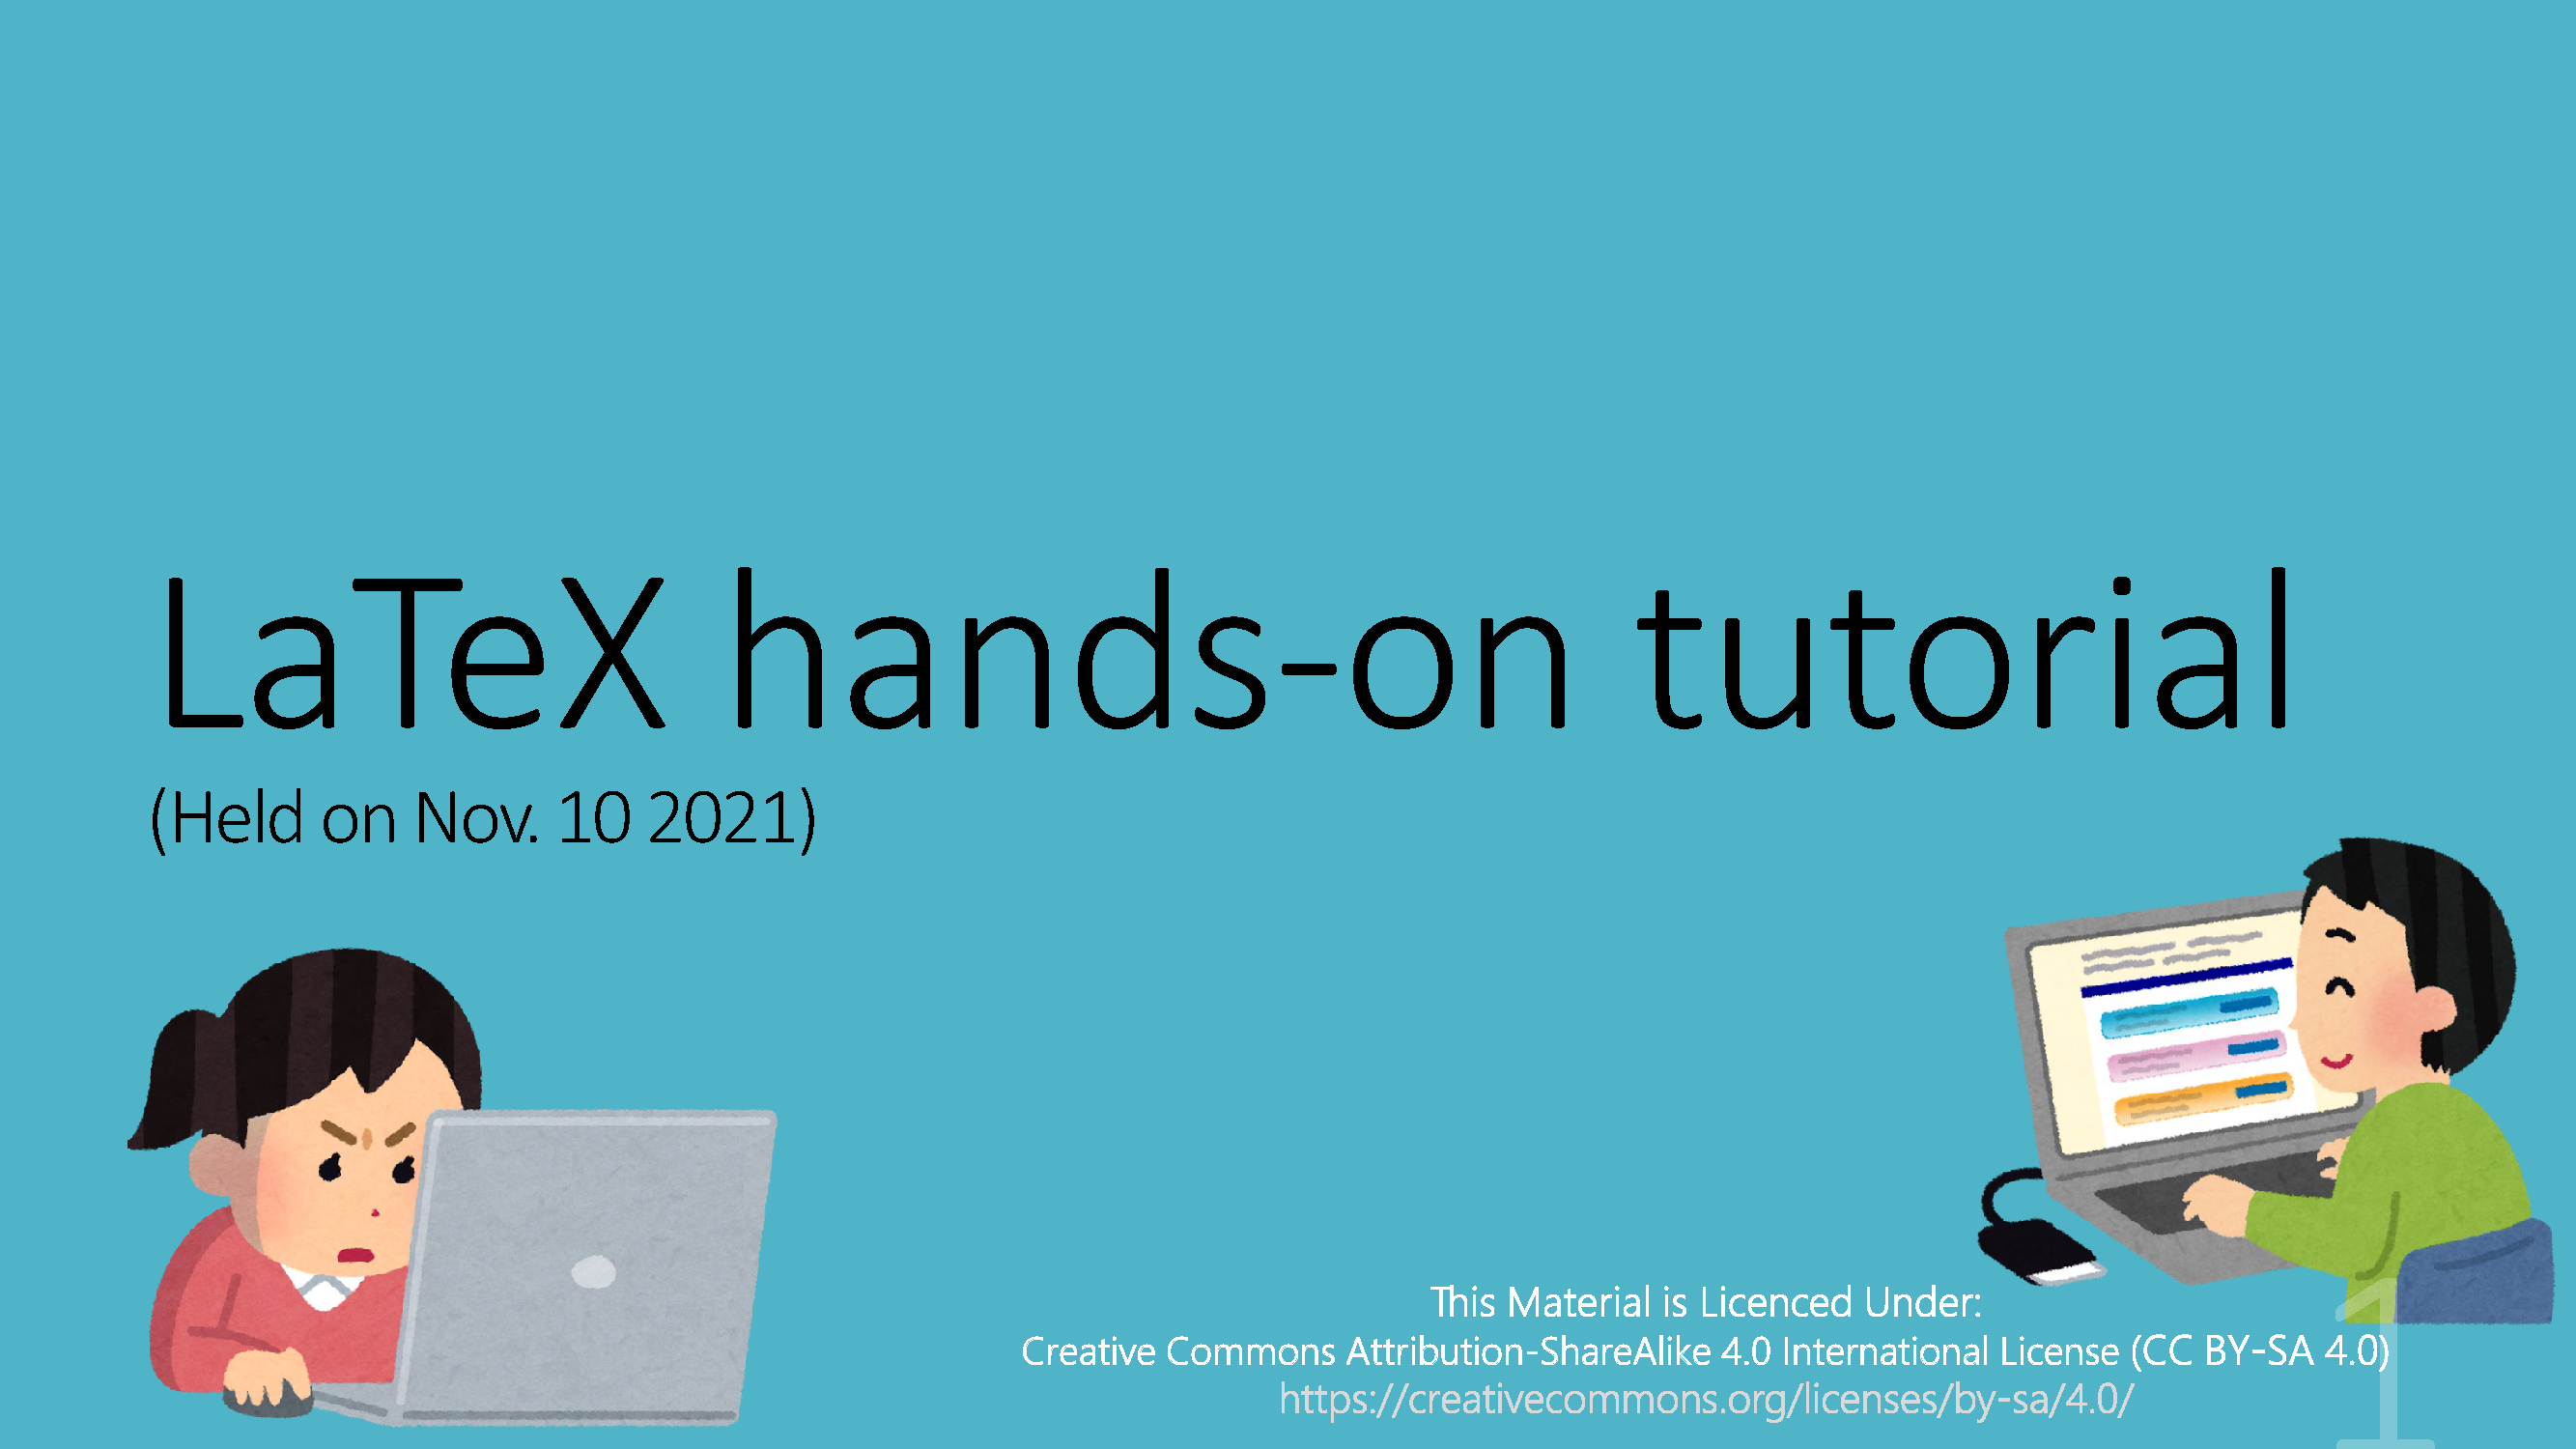 PDF　LaTex hands-on tutorial　（you can read this at library page on cyber learning space）